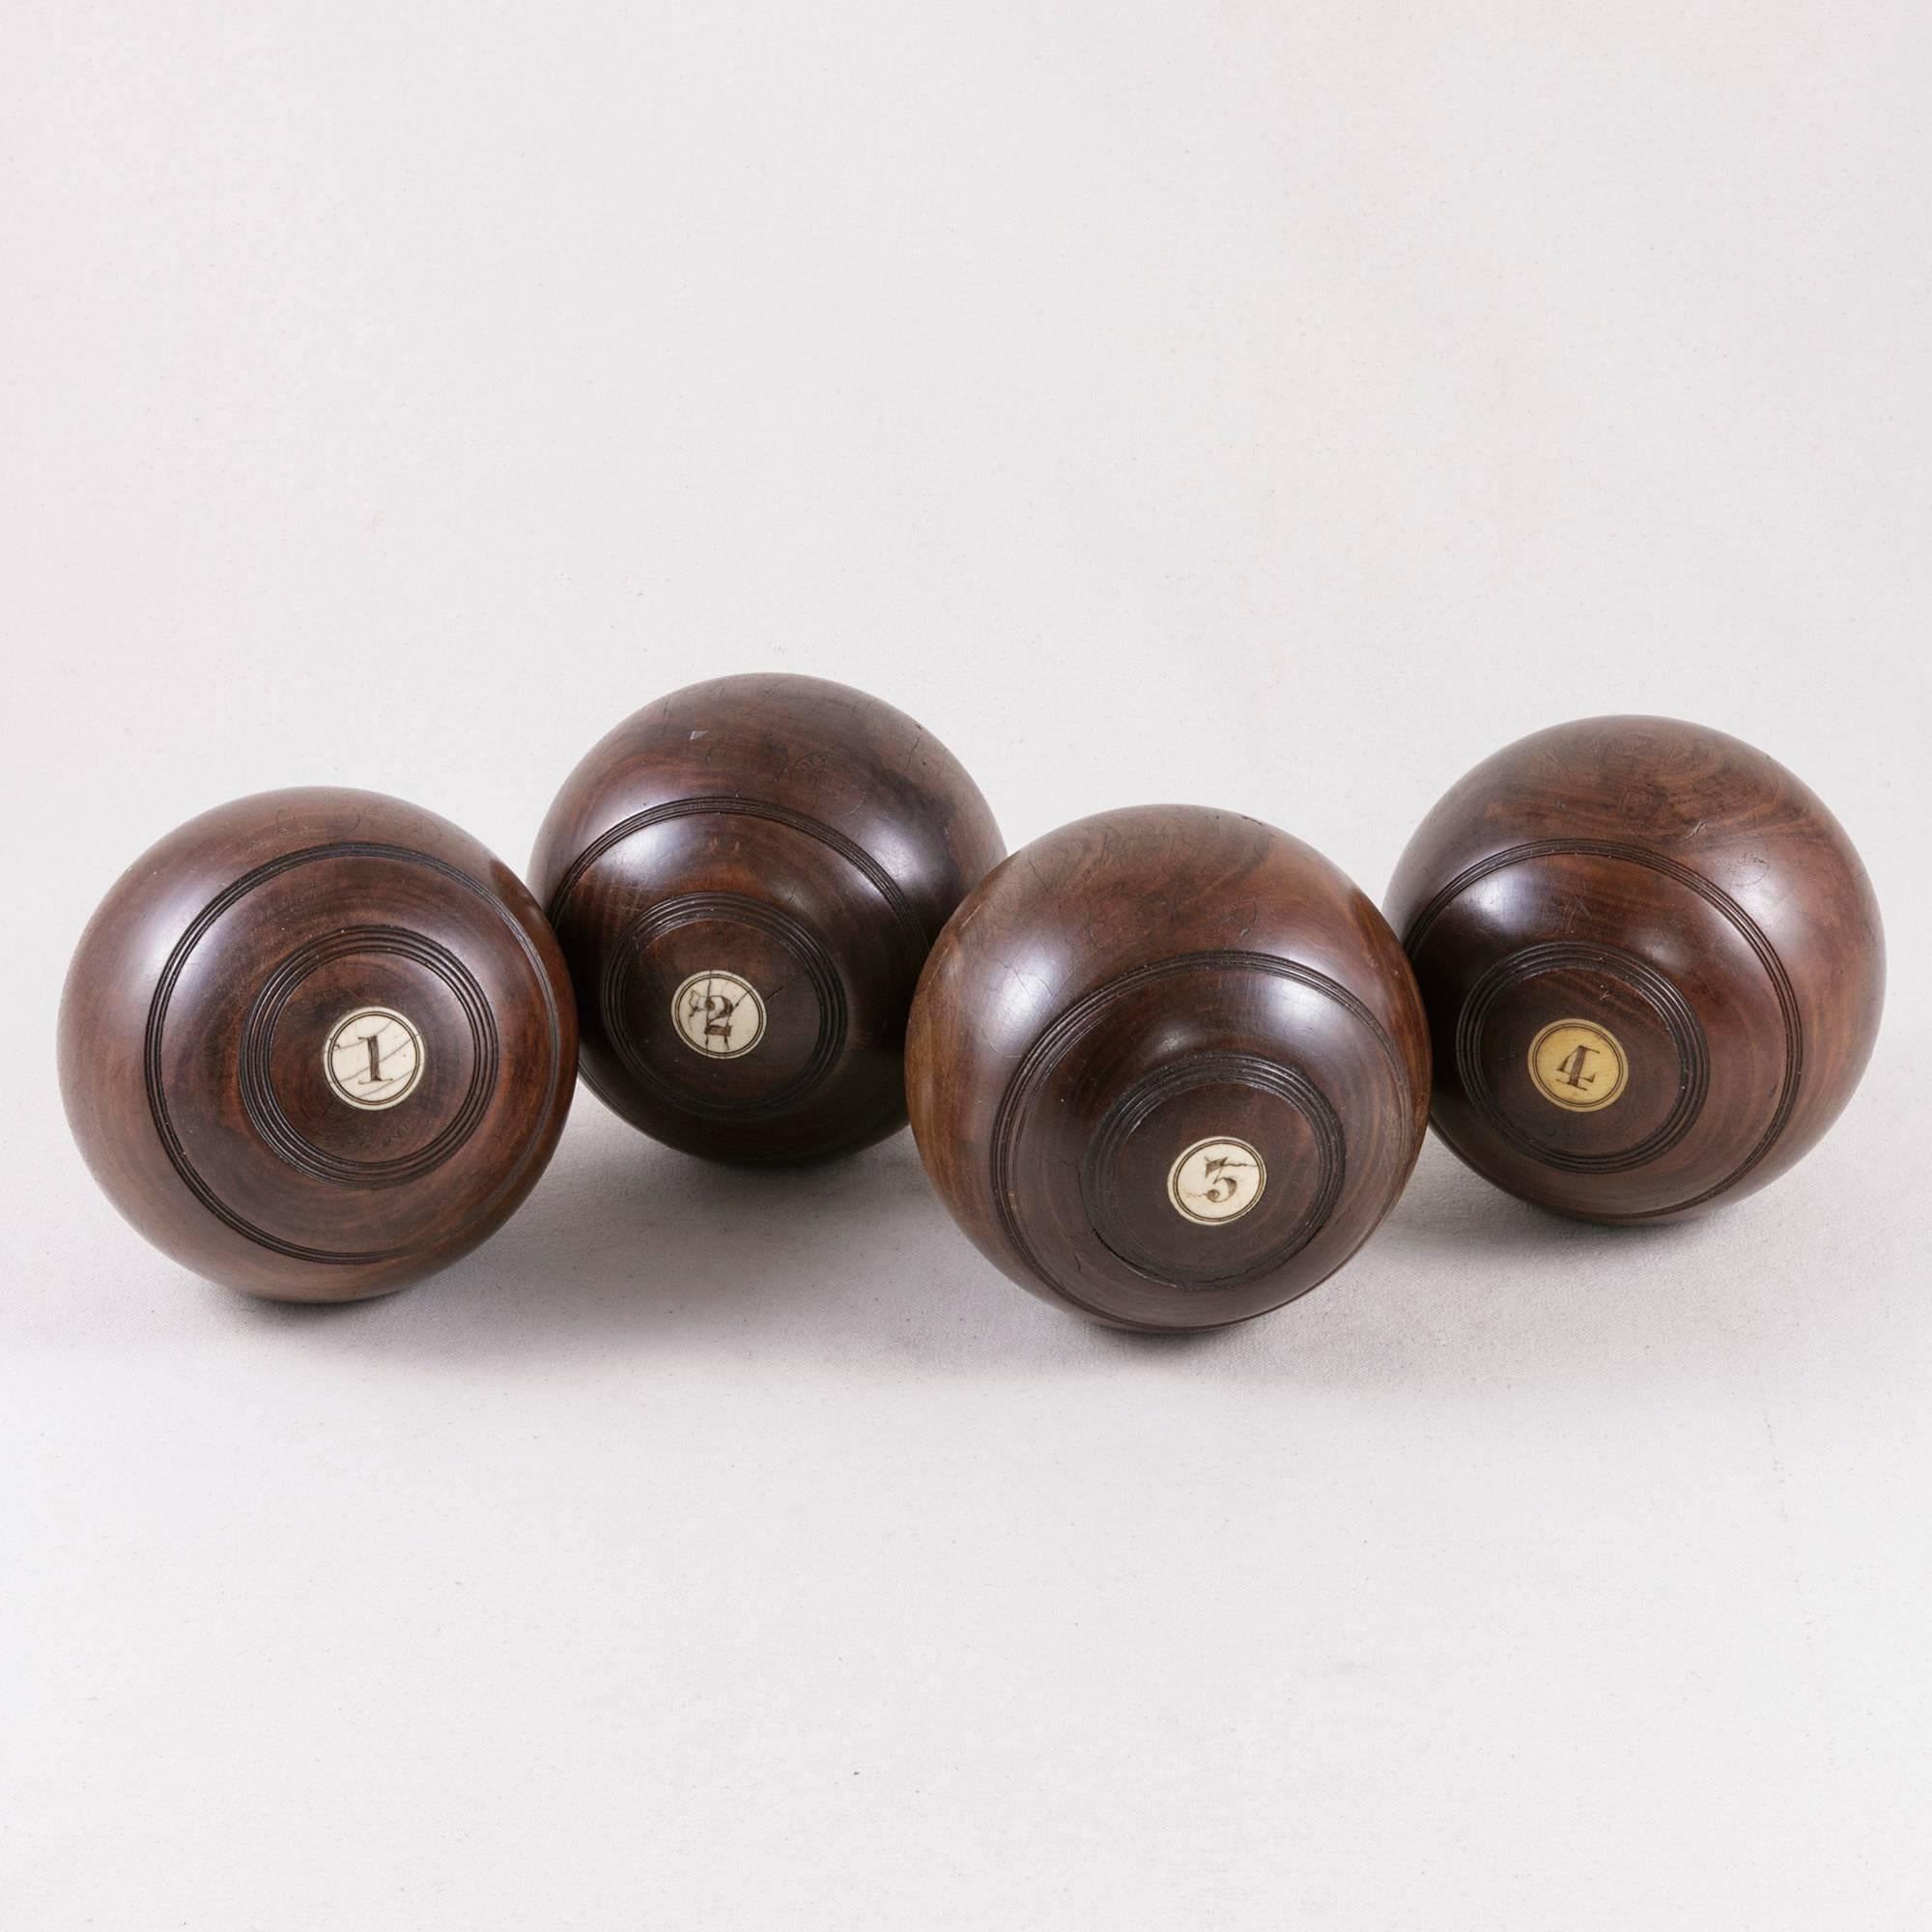 This set of four English lawn balls is made from burled lignum vitae. Imported from South America and known as the 